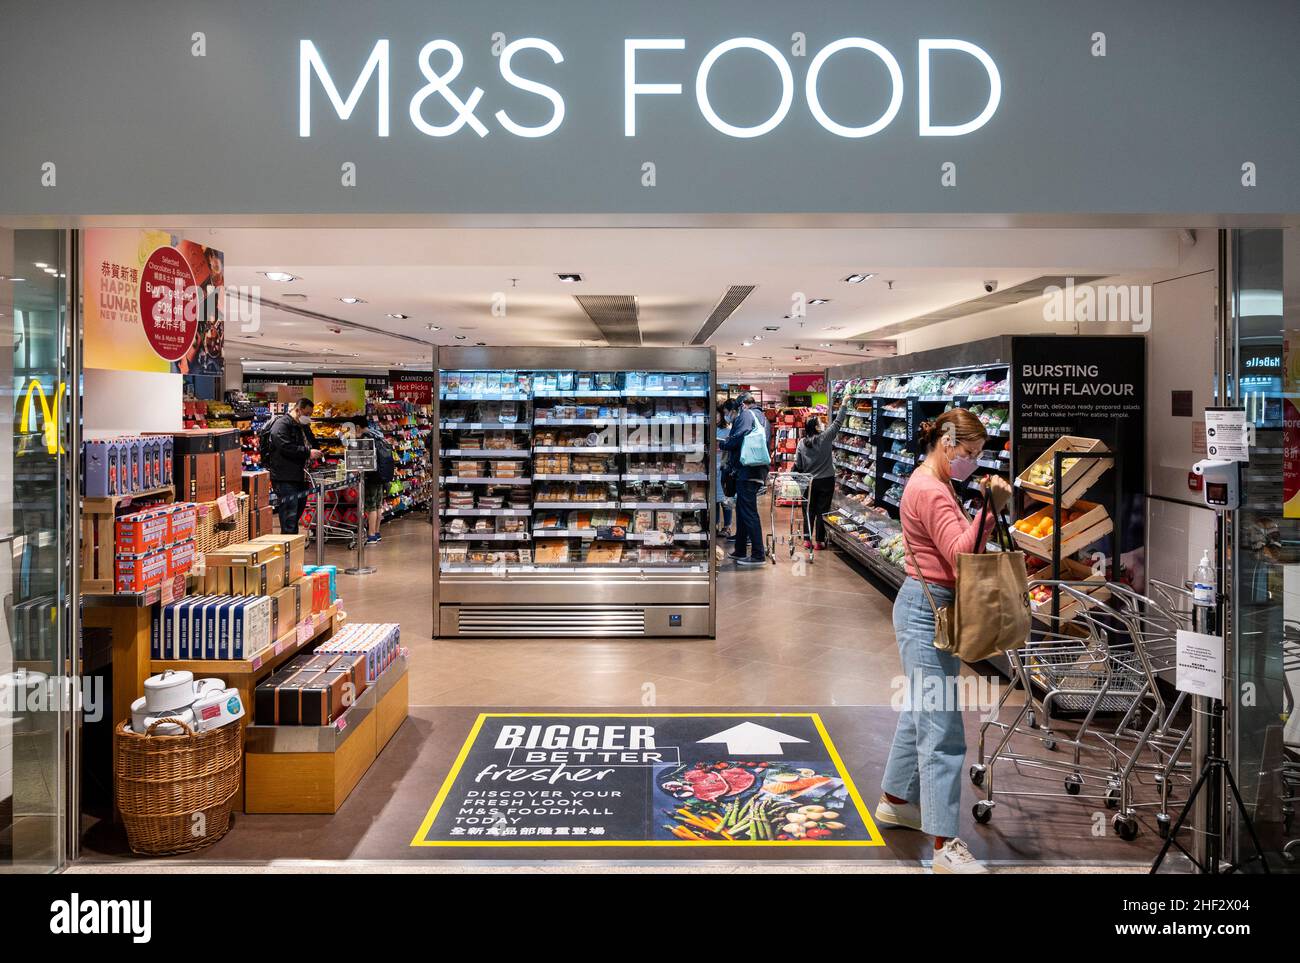 Marks and Spencer food sales grew 14.7% with LFL sales up 11.7%